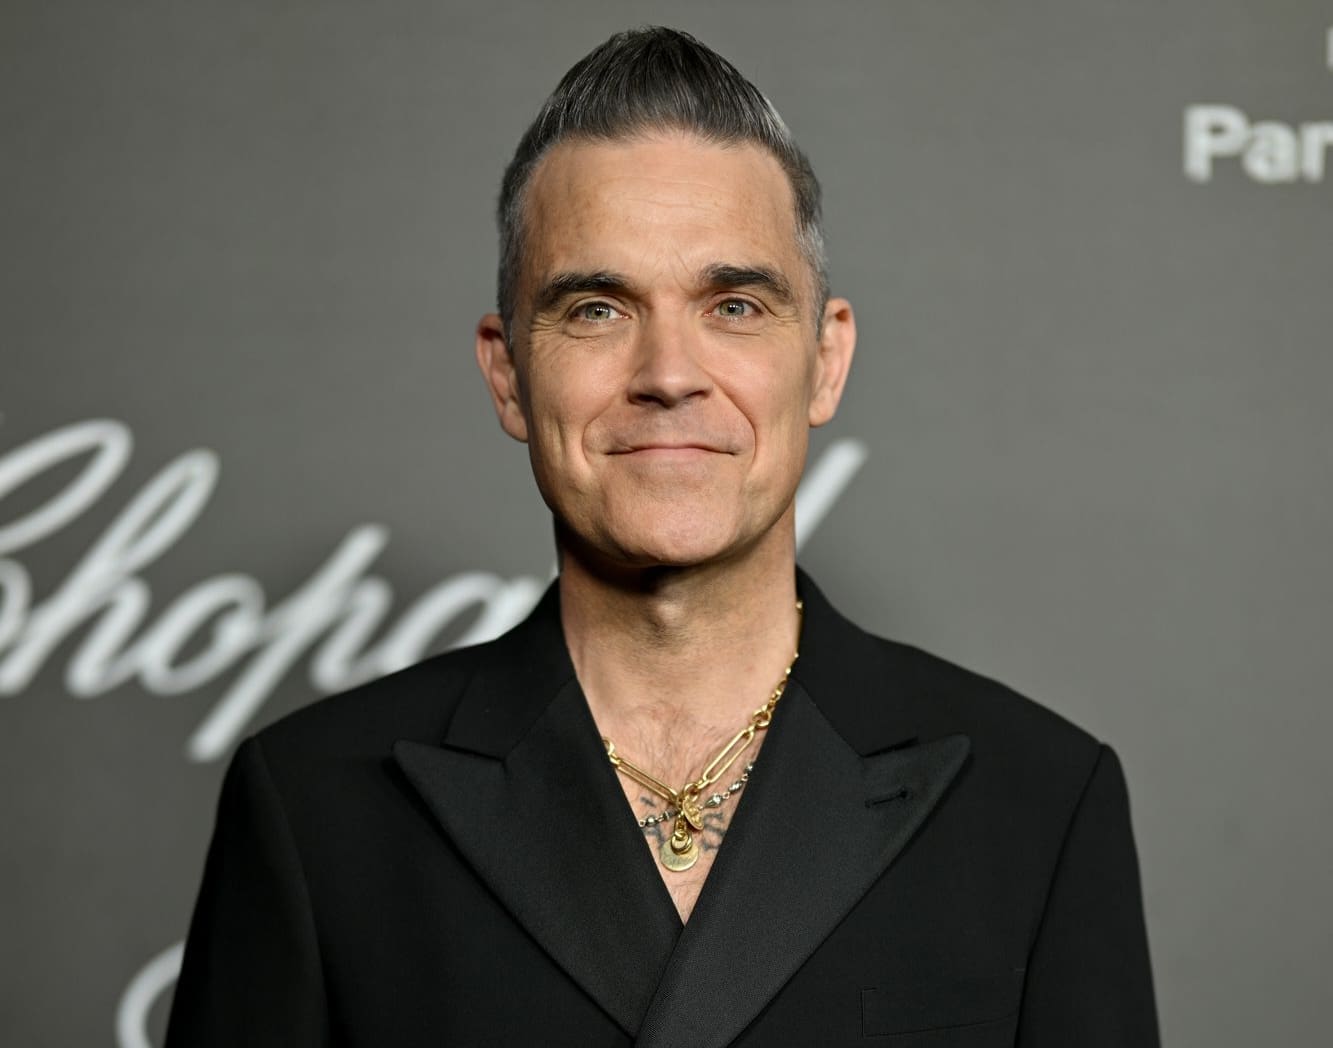 Robbie Williams Says He’s Taking ‘Something Like Ozempic’: ‘It’s Like a Christmas Miracle’